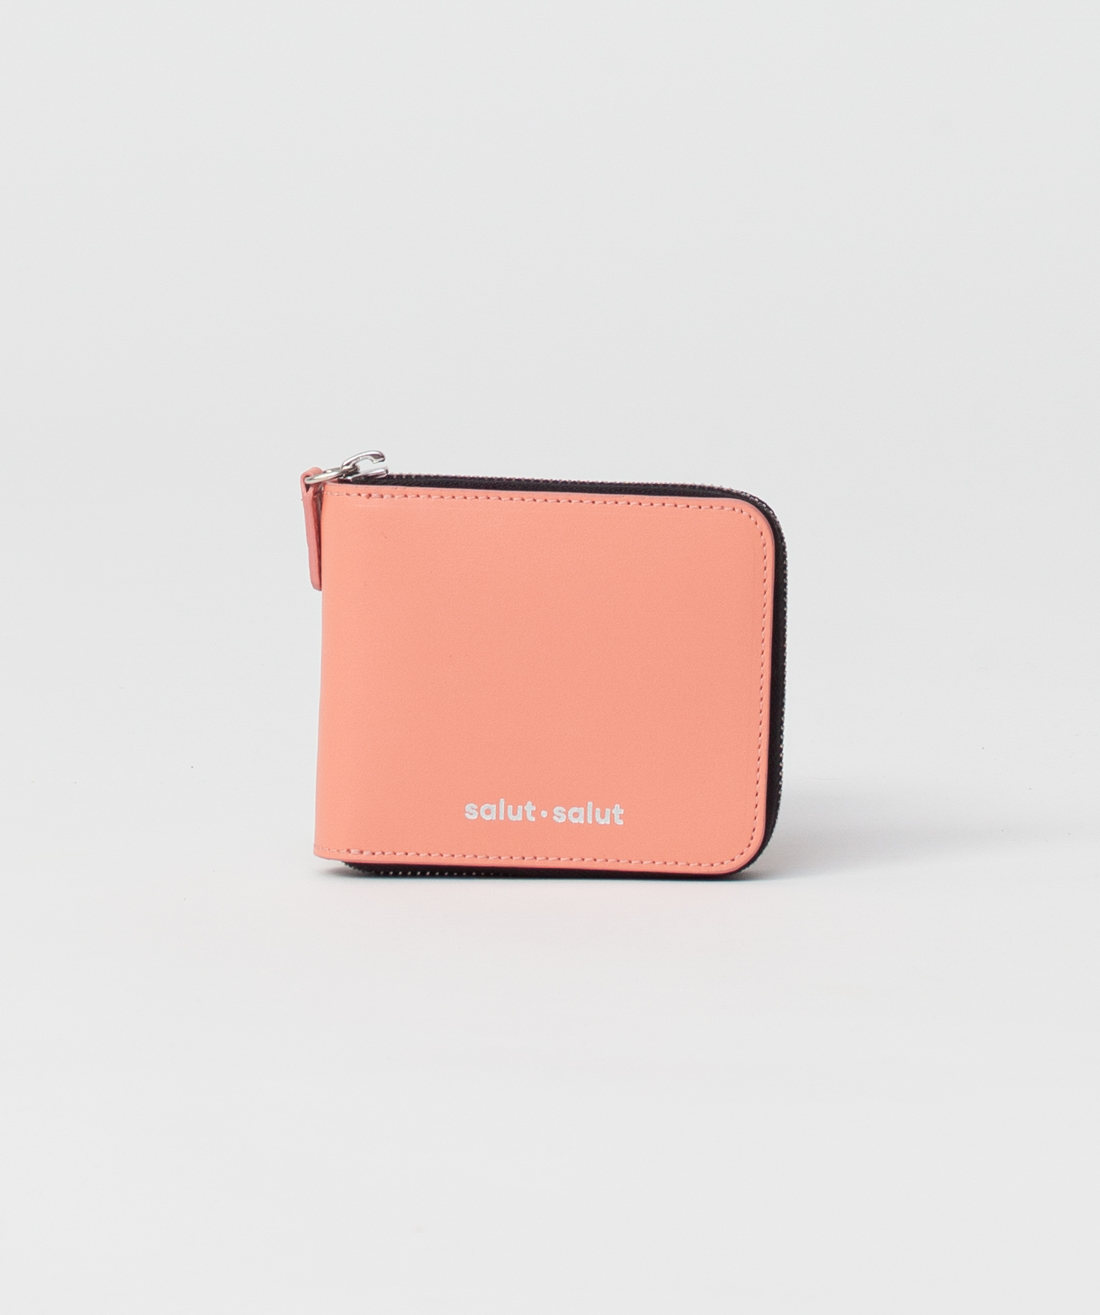 Square Cash - PINK LEATHER